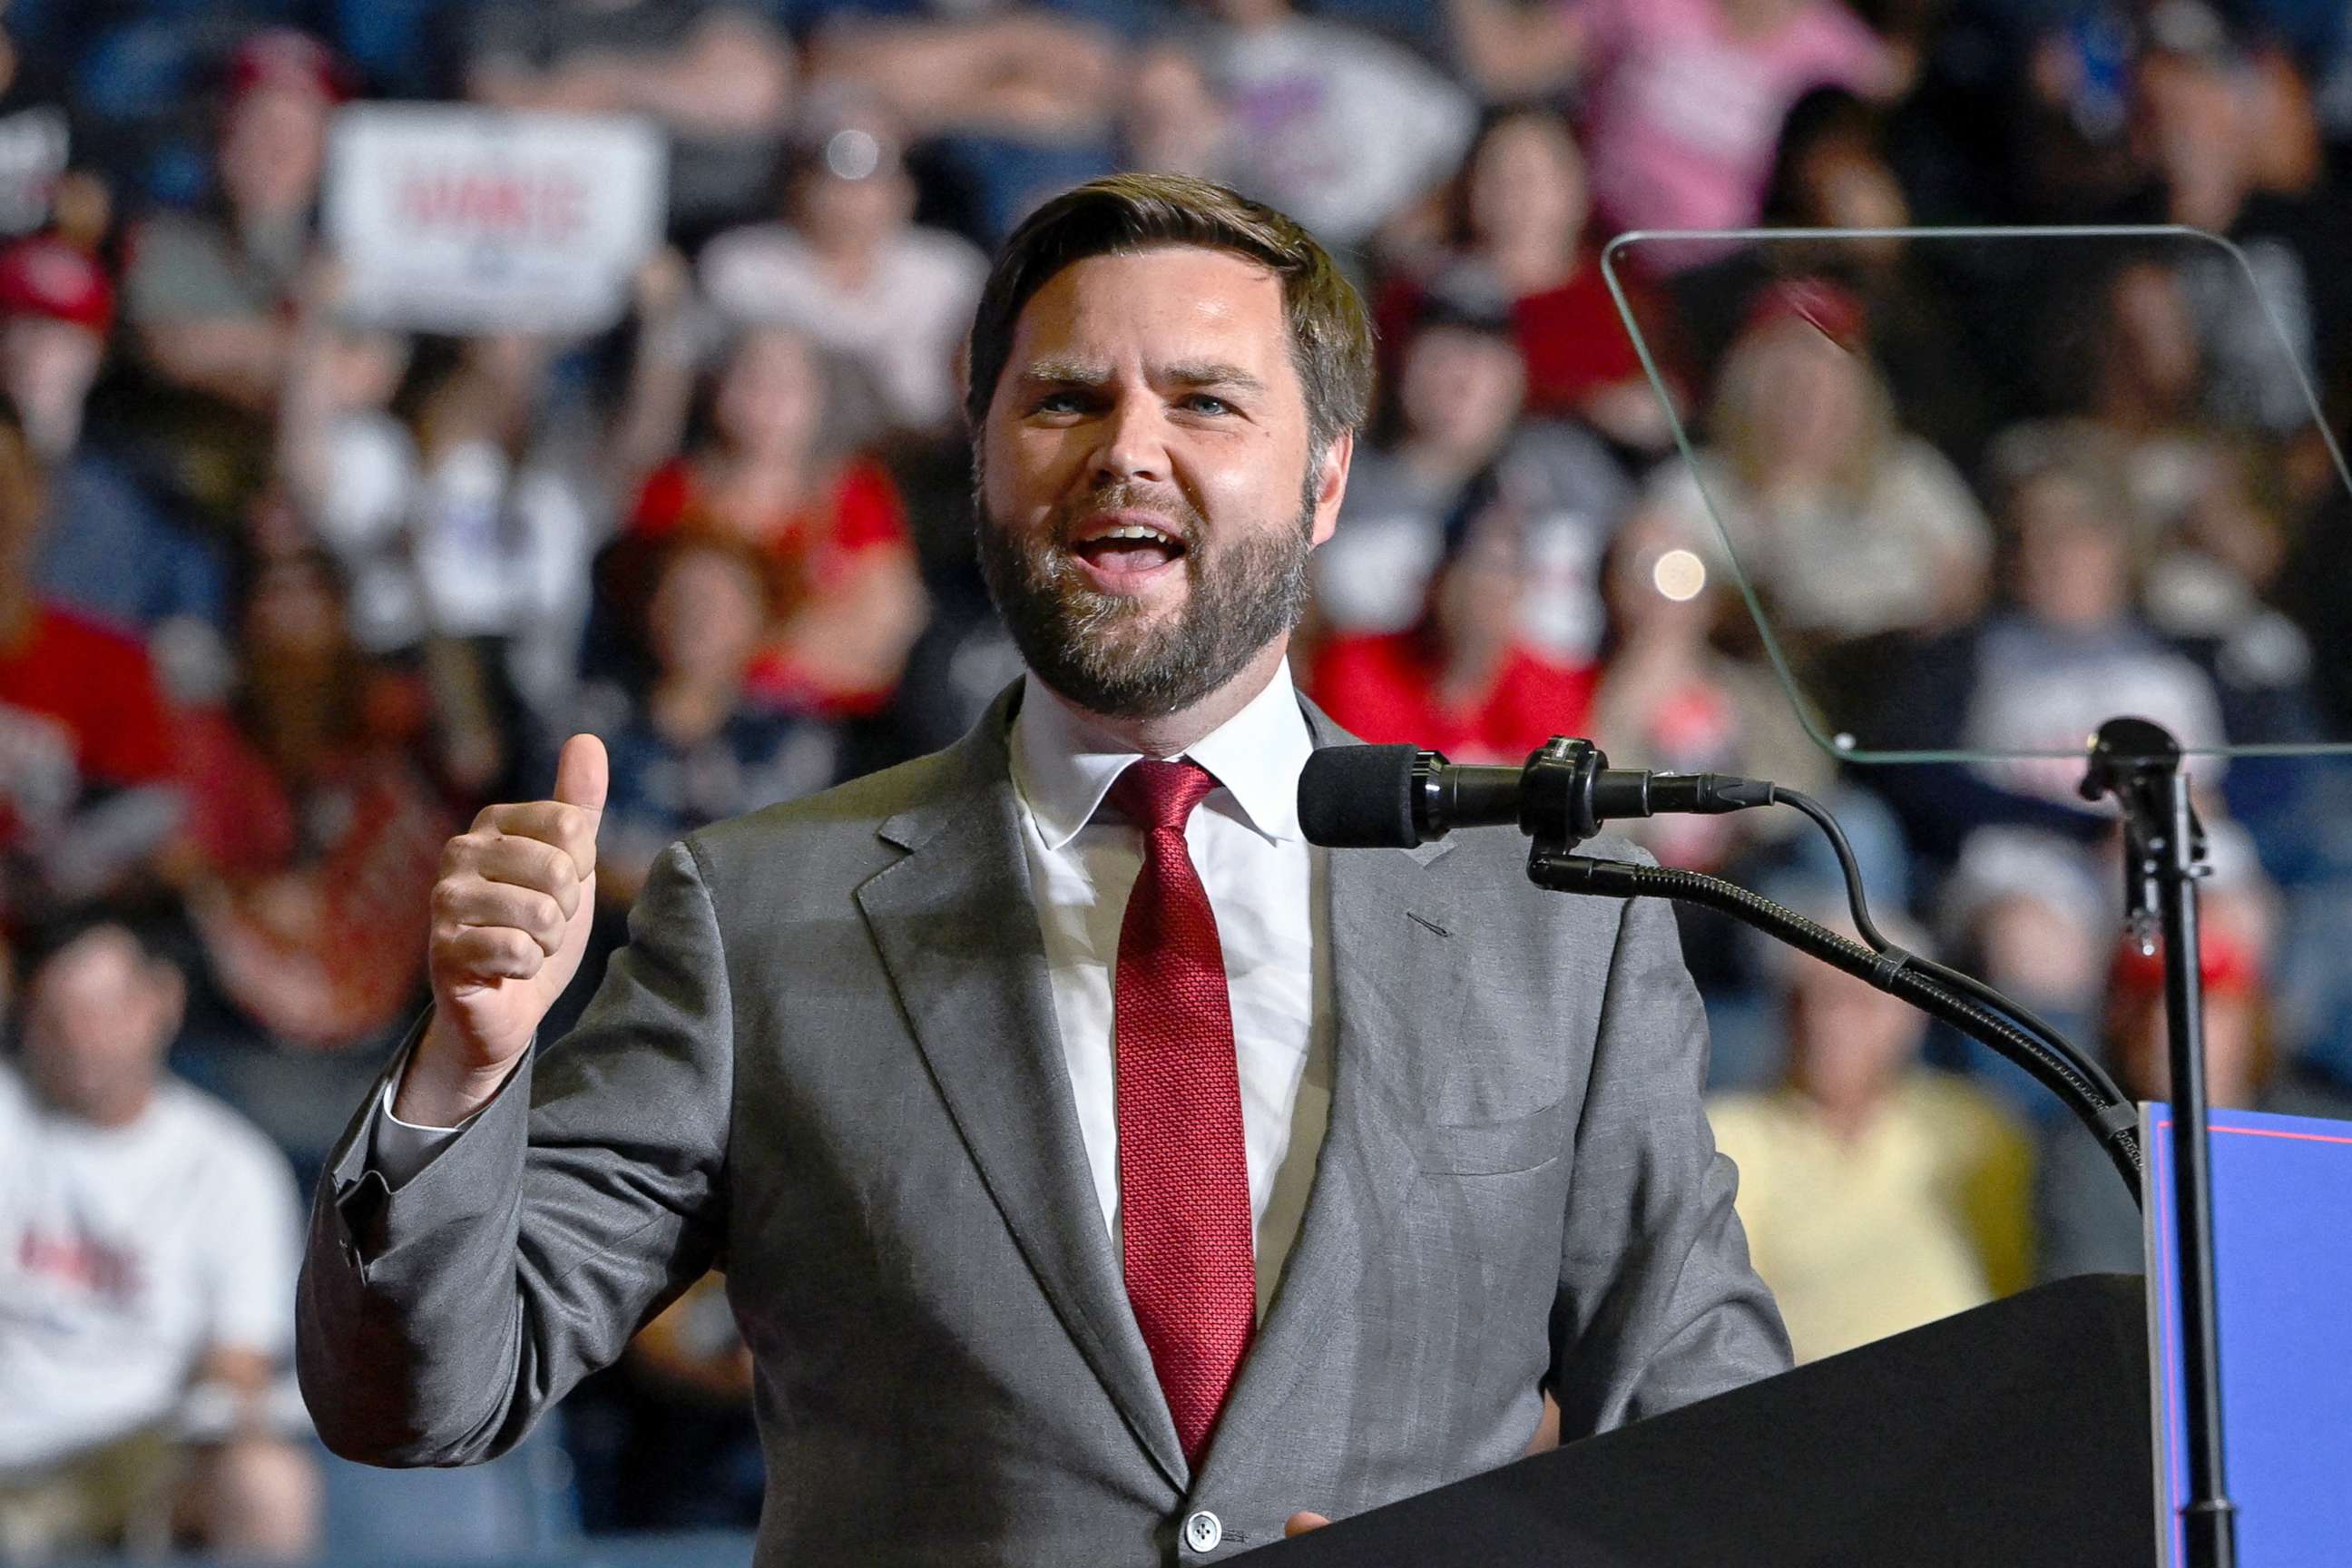 PHOTO: Senate Republican candidate JD Vance speaks to attendees the stage at a rally in Youngstown, Ohio, Sept. 17, 2022. 